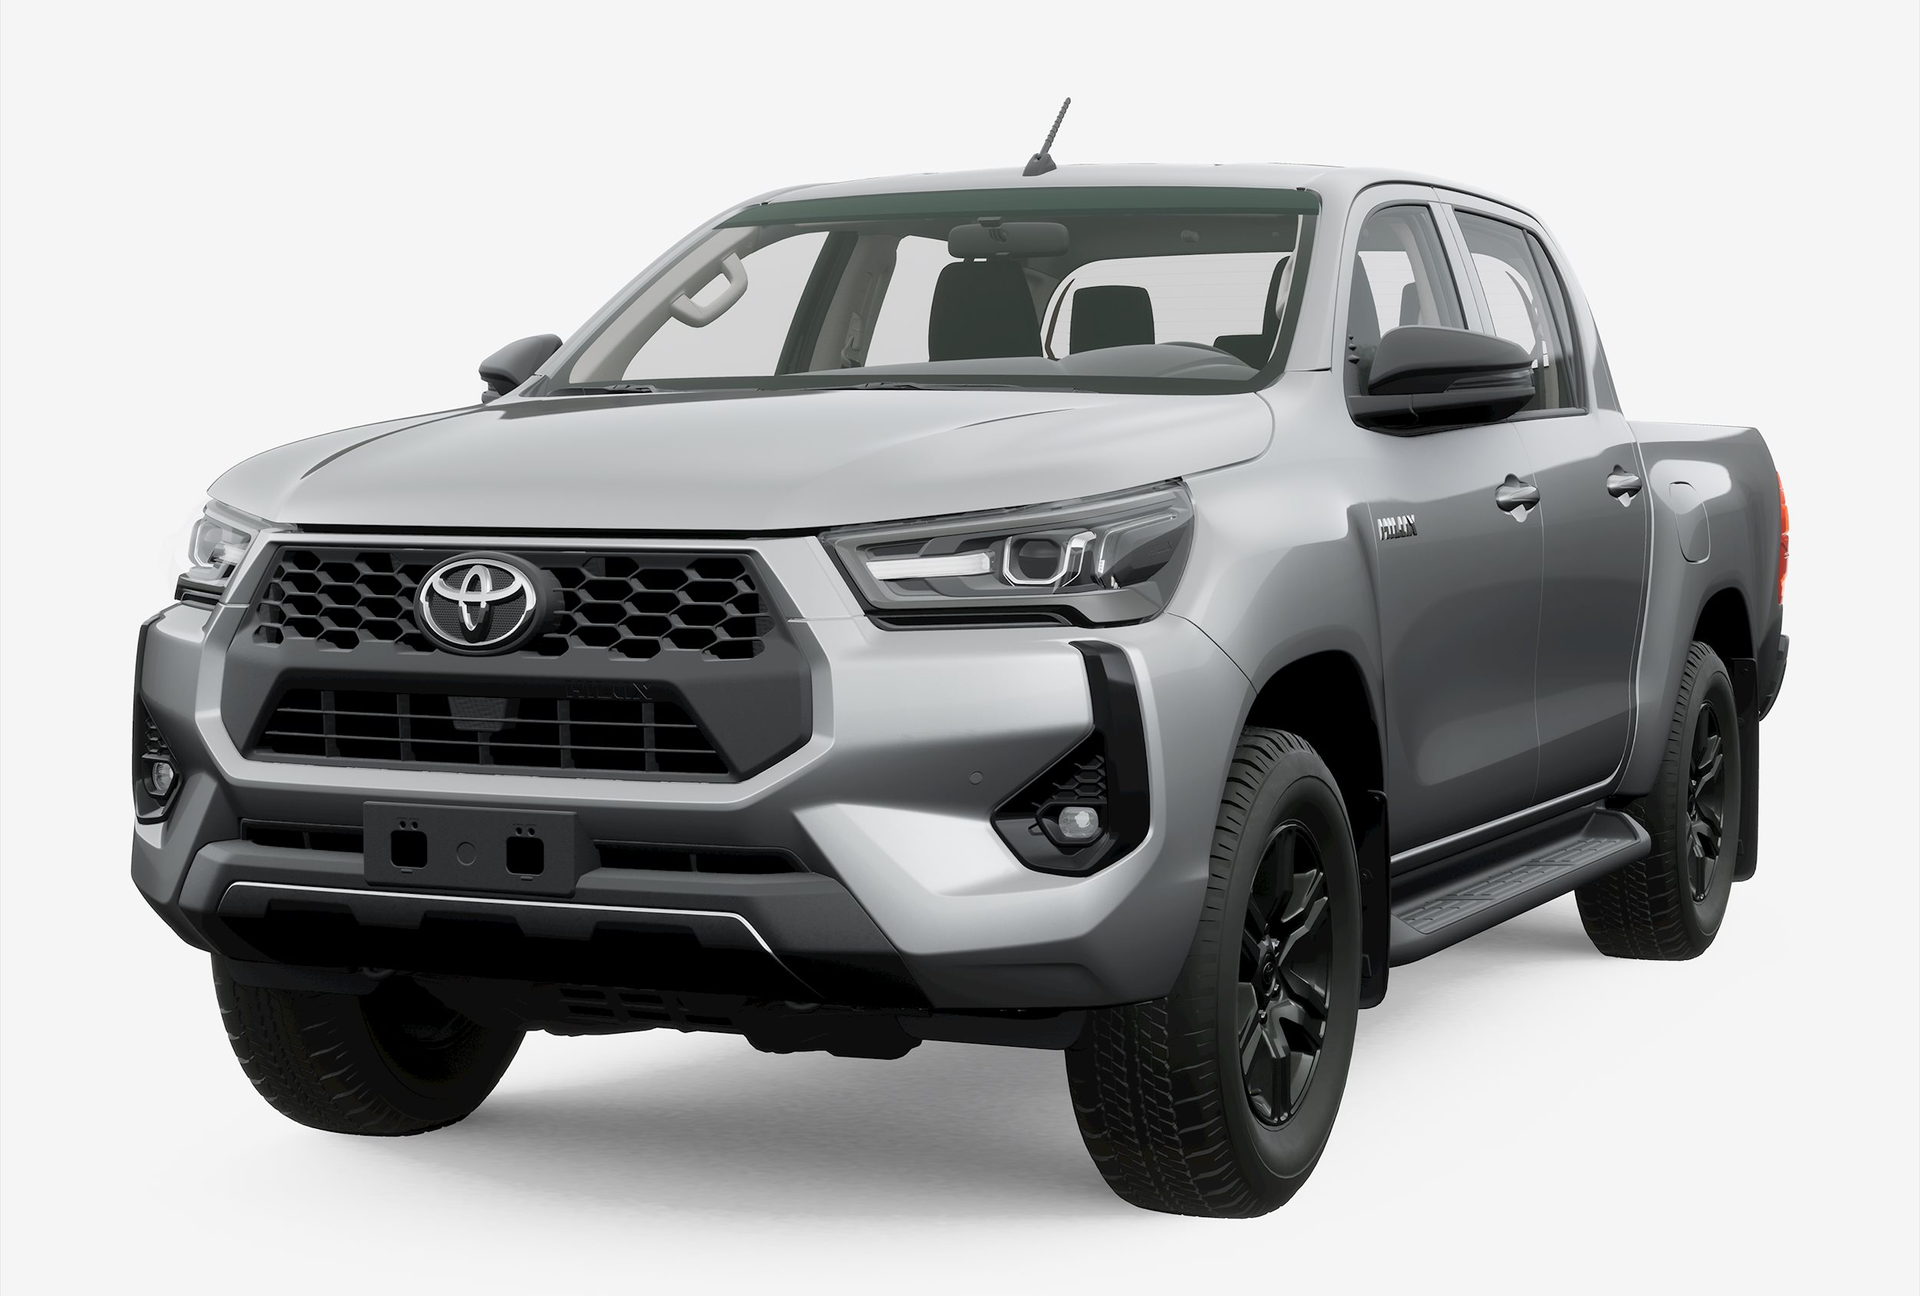 hilux-2.4-4x2-at-bac.png